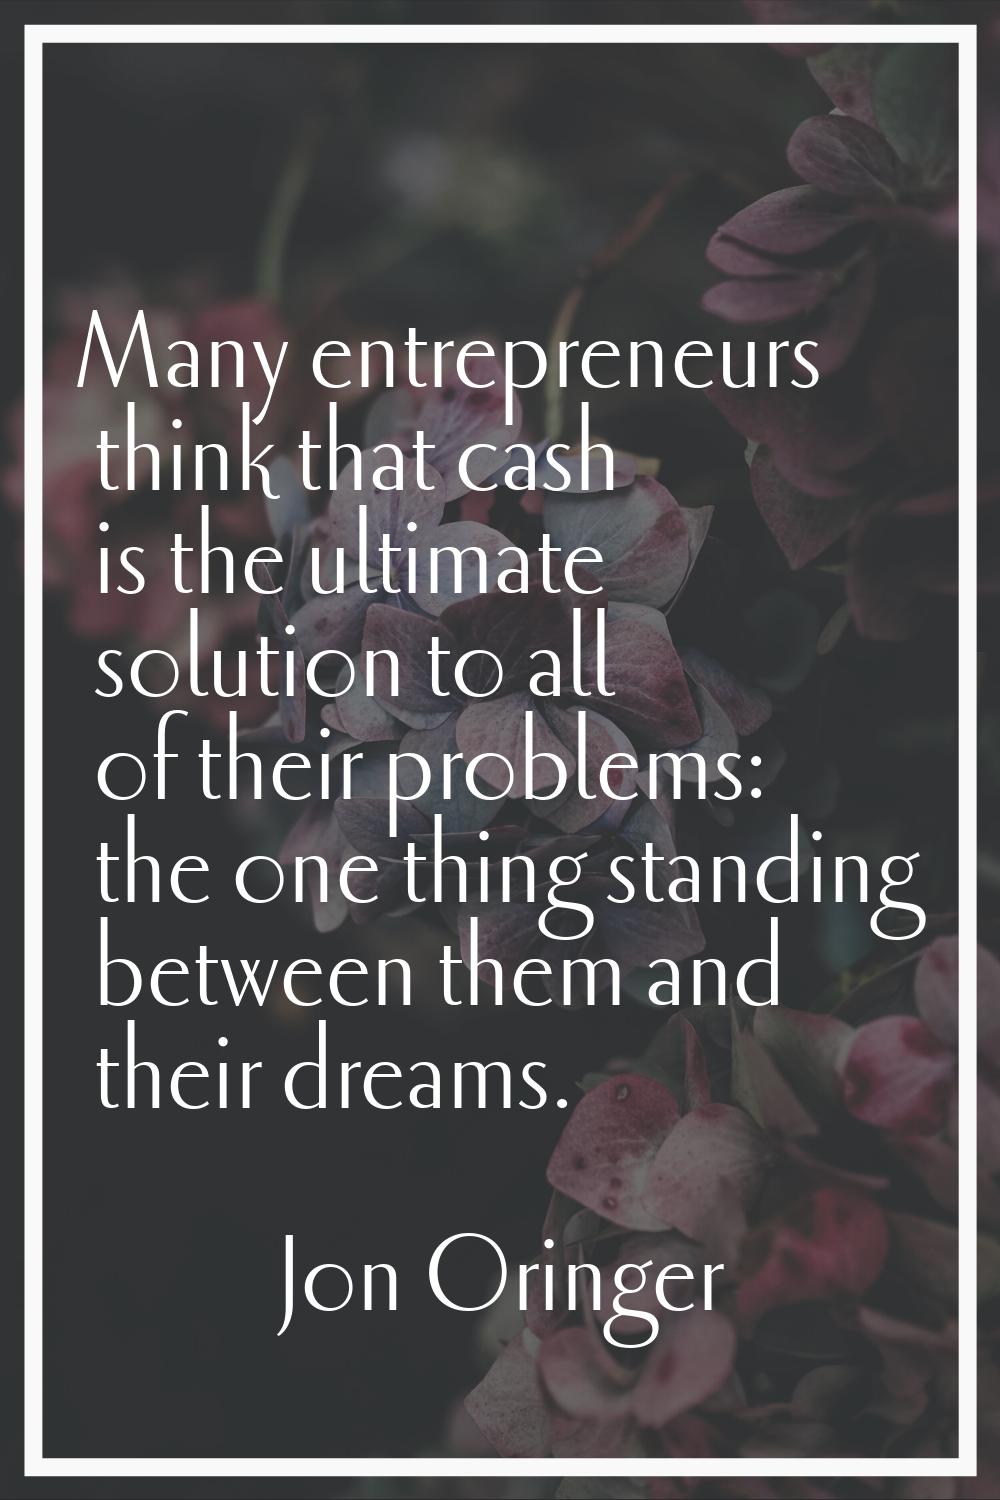 Many entrepreneurs think that cash is the ultimate solution to all of their problems: the one thing